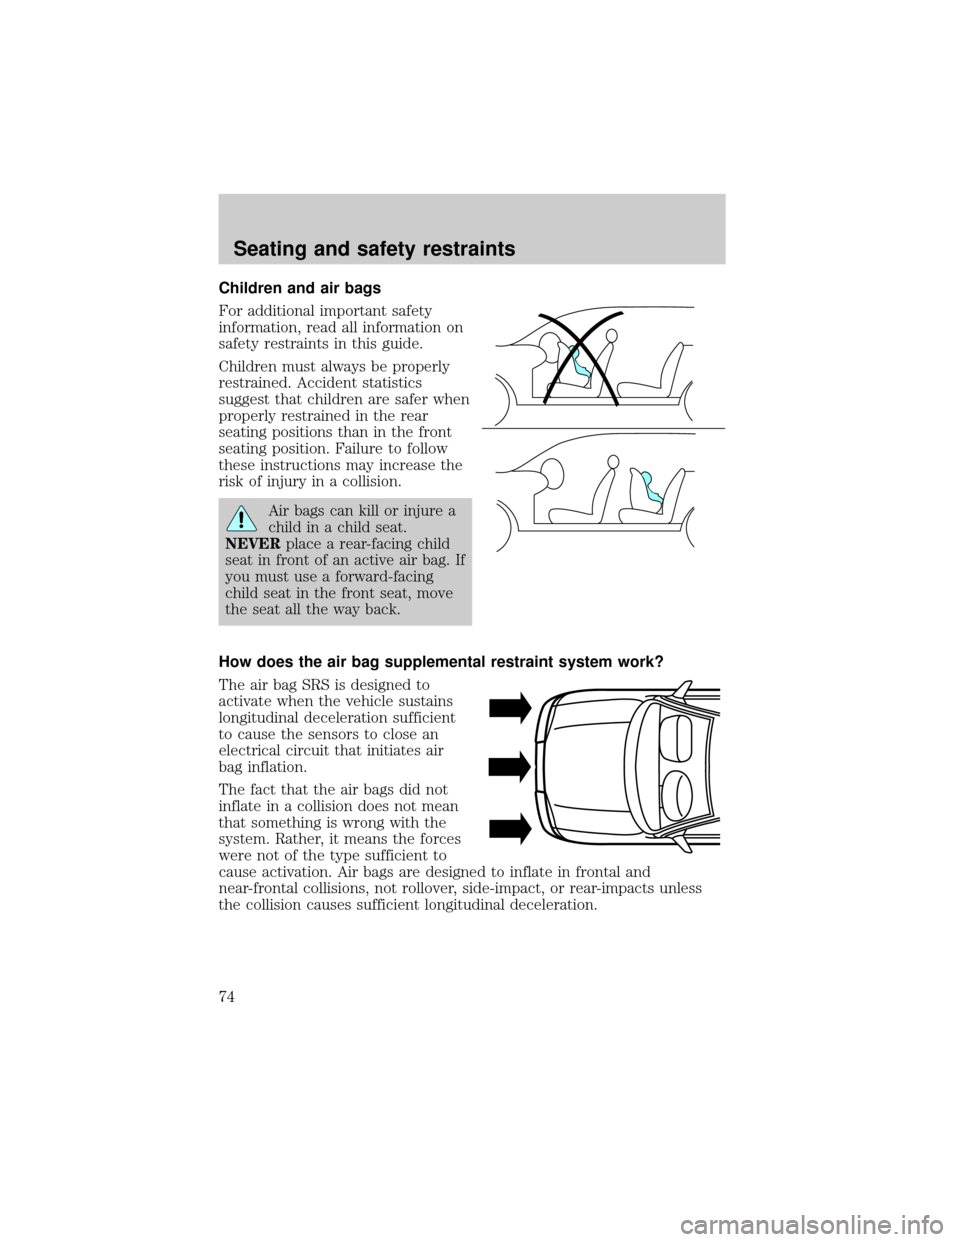 FORD ESCORT 2000 6.G Manual PDF Children and air bags
For additional important safety
information, read all information on
safety restraints in this guide.
Children must always be properly
restrained. Accident statistics
suggest tha